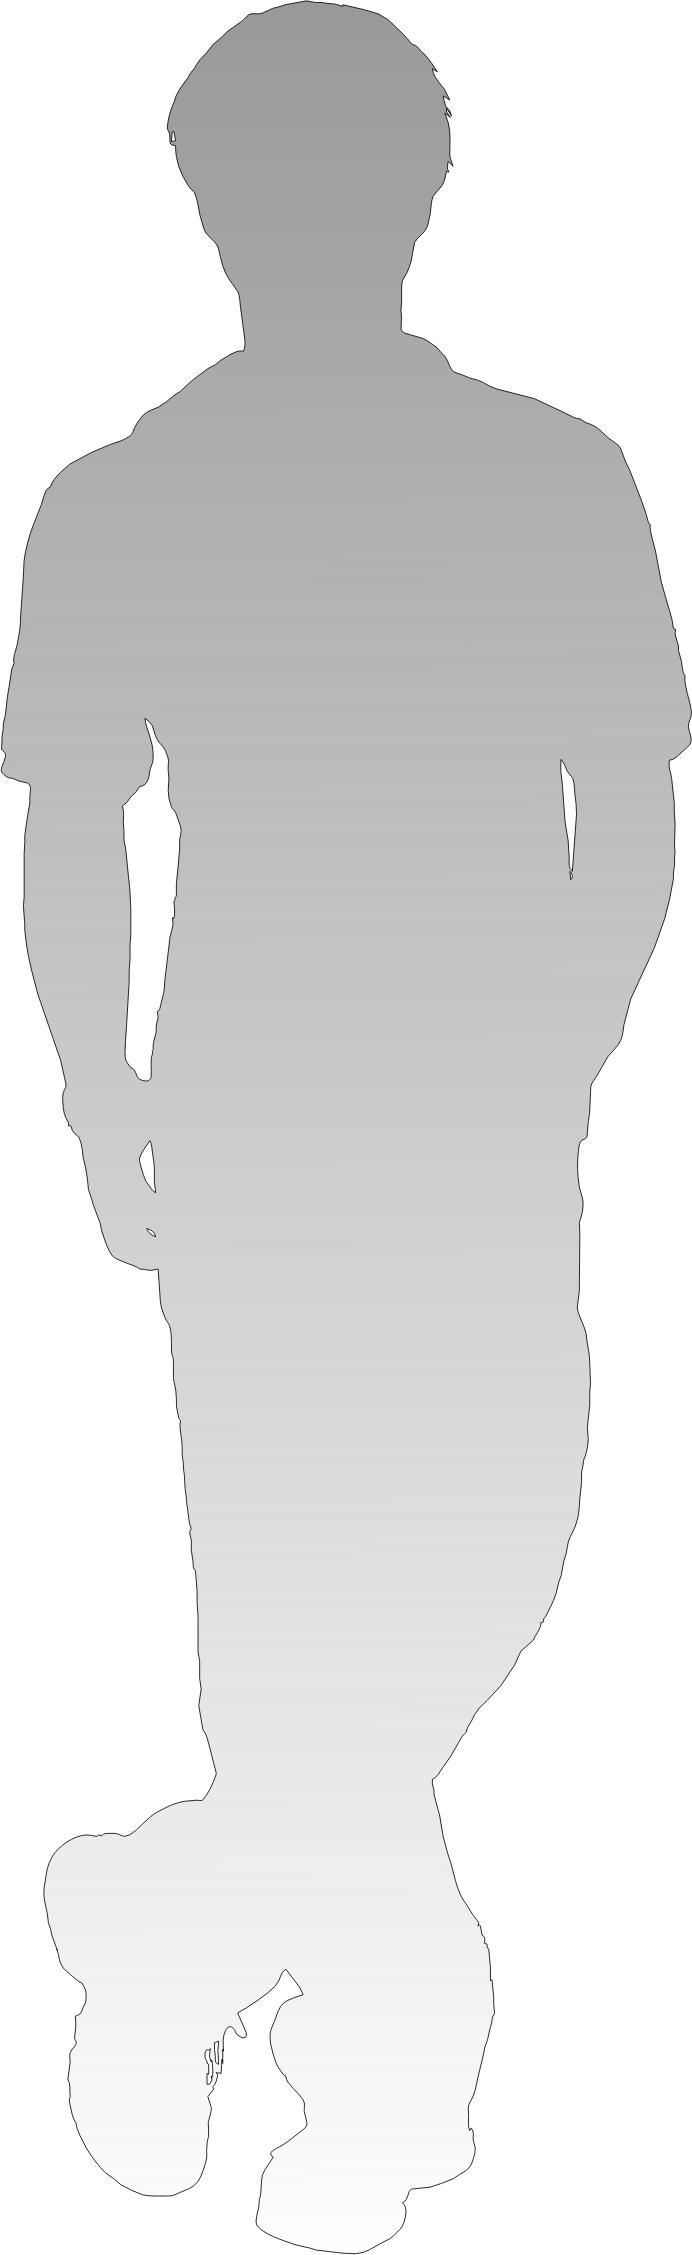 shadow of person - standing leg cross and put hands in the pockets png